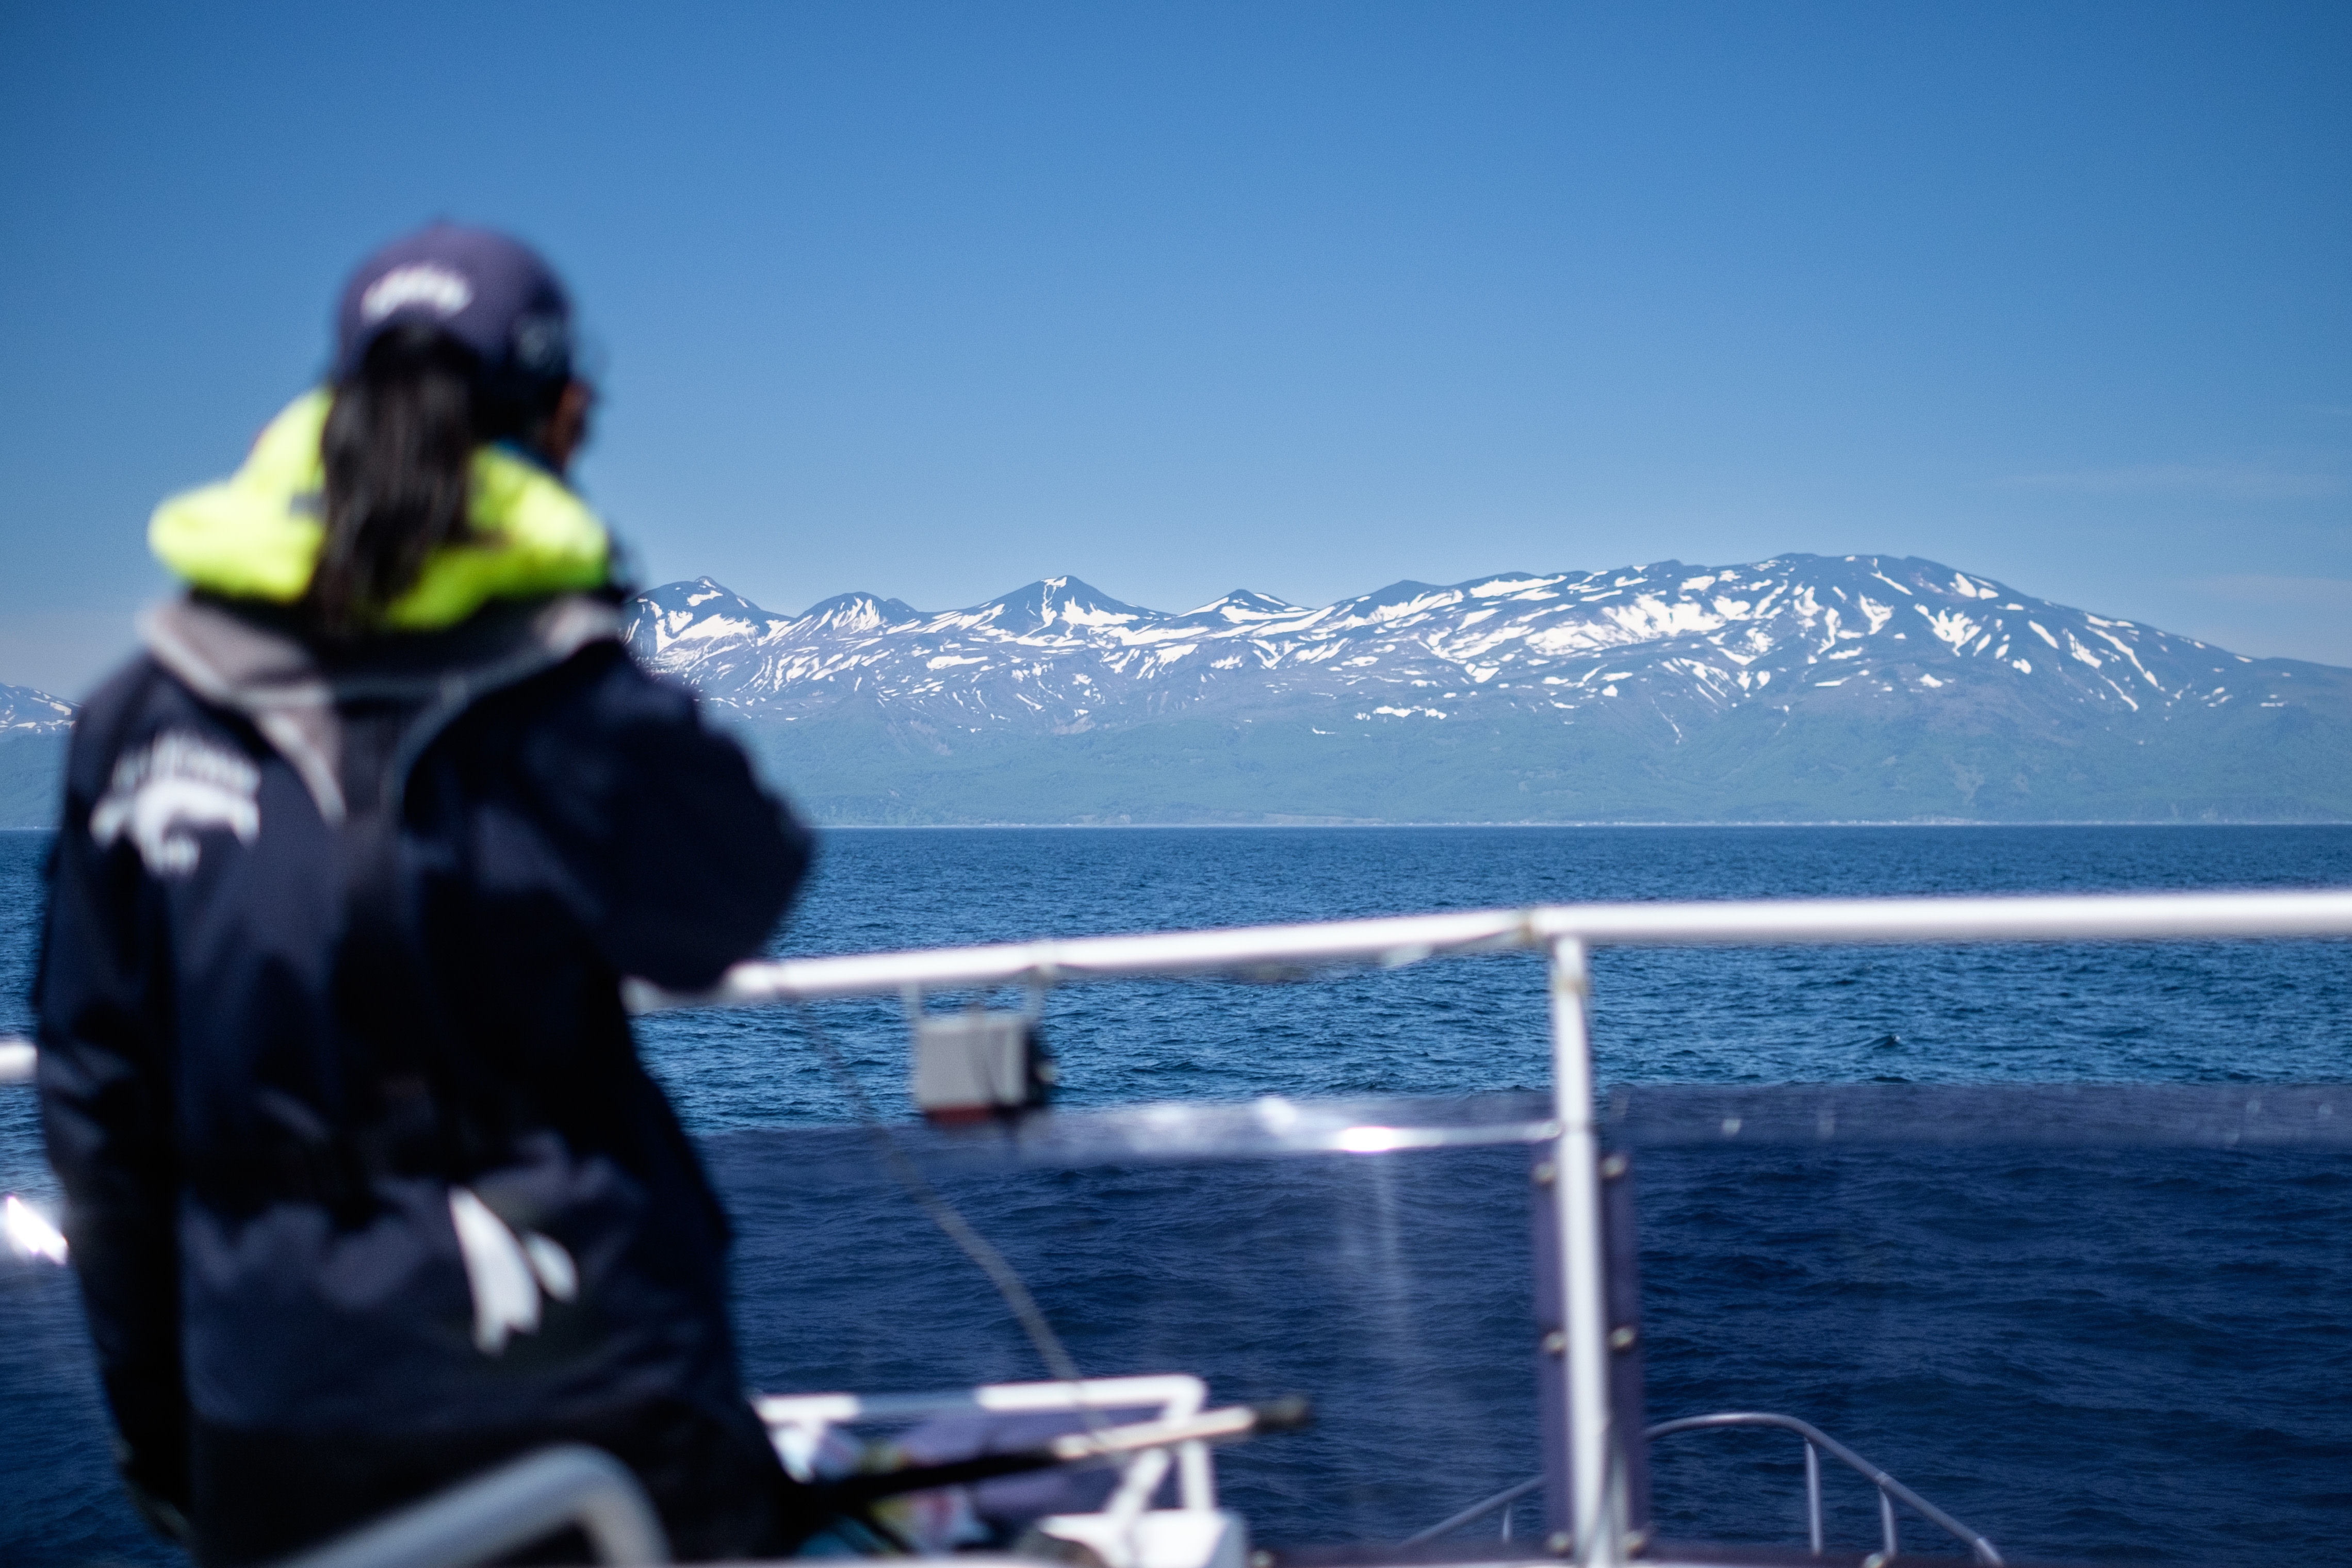 A crew member of a whale watching cruise looks out from the top deck of a boat. Across the water you can see the mountains of the Shiretoko peninsula, which still have patches of snow on them.